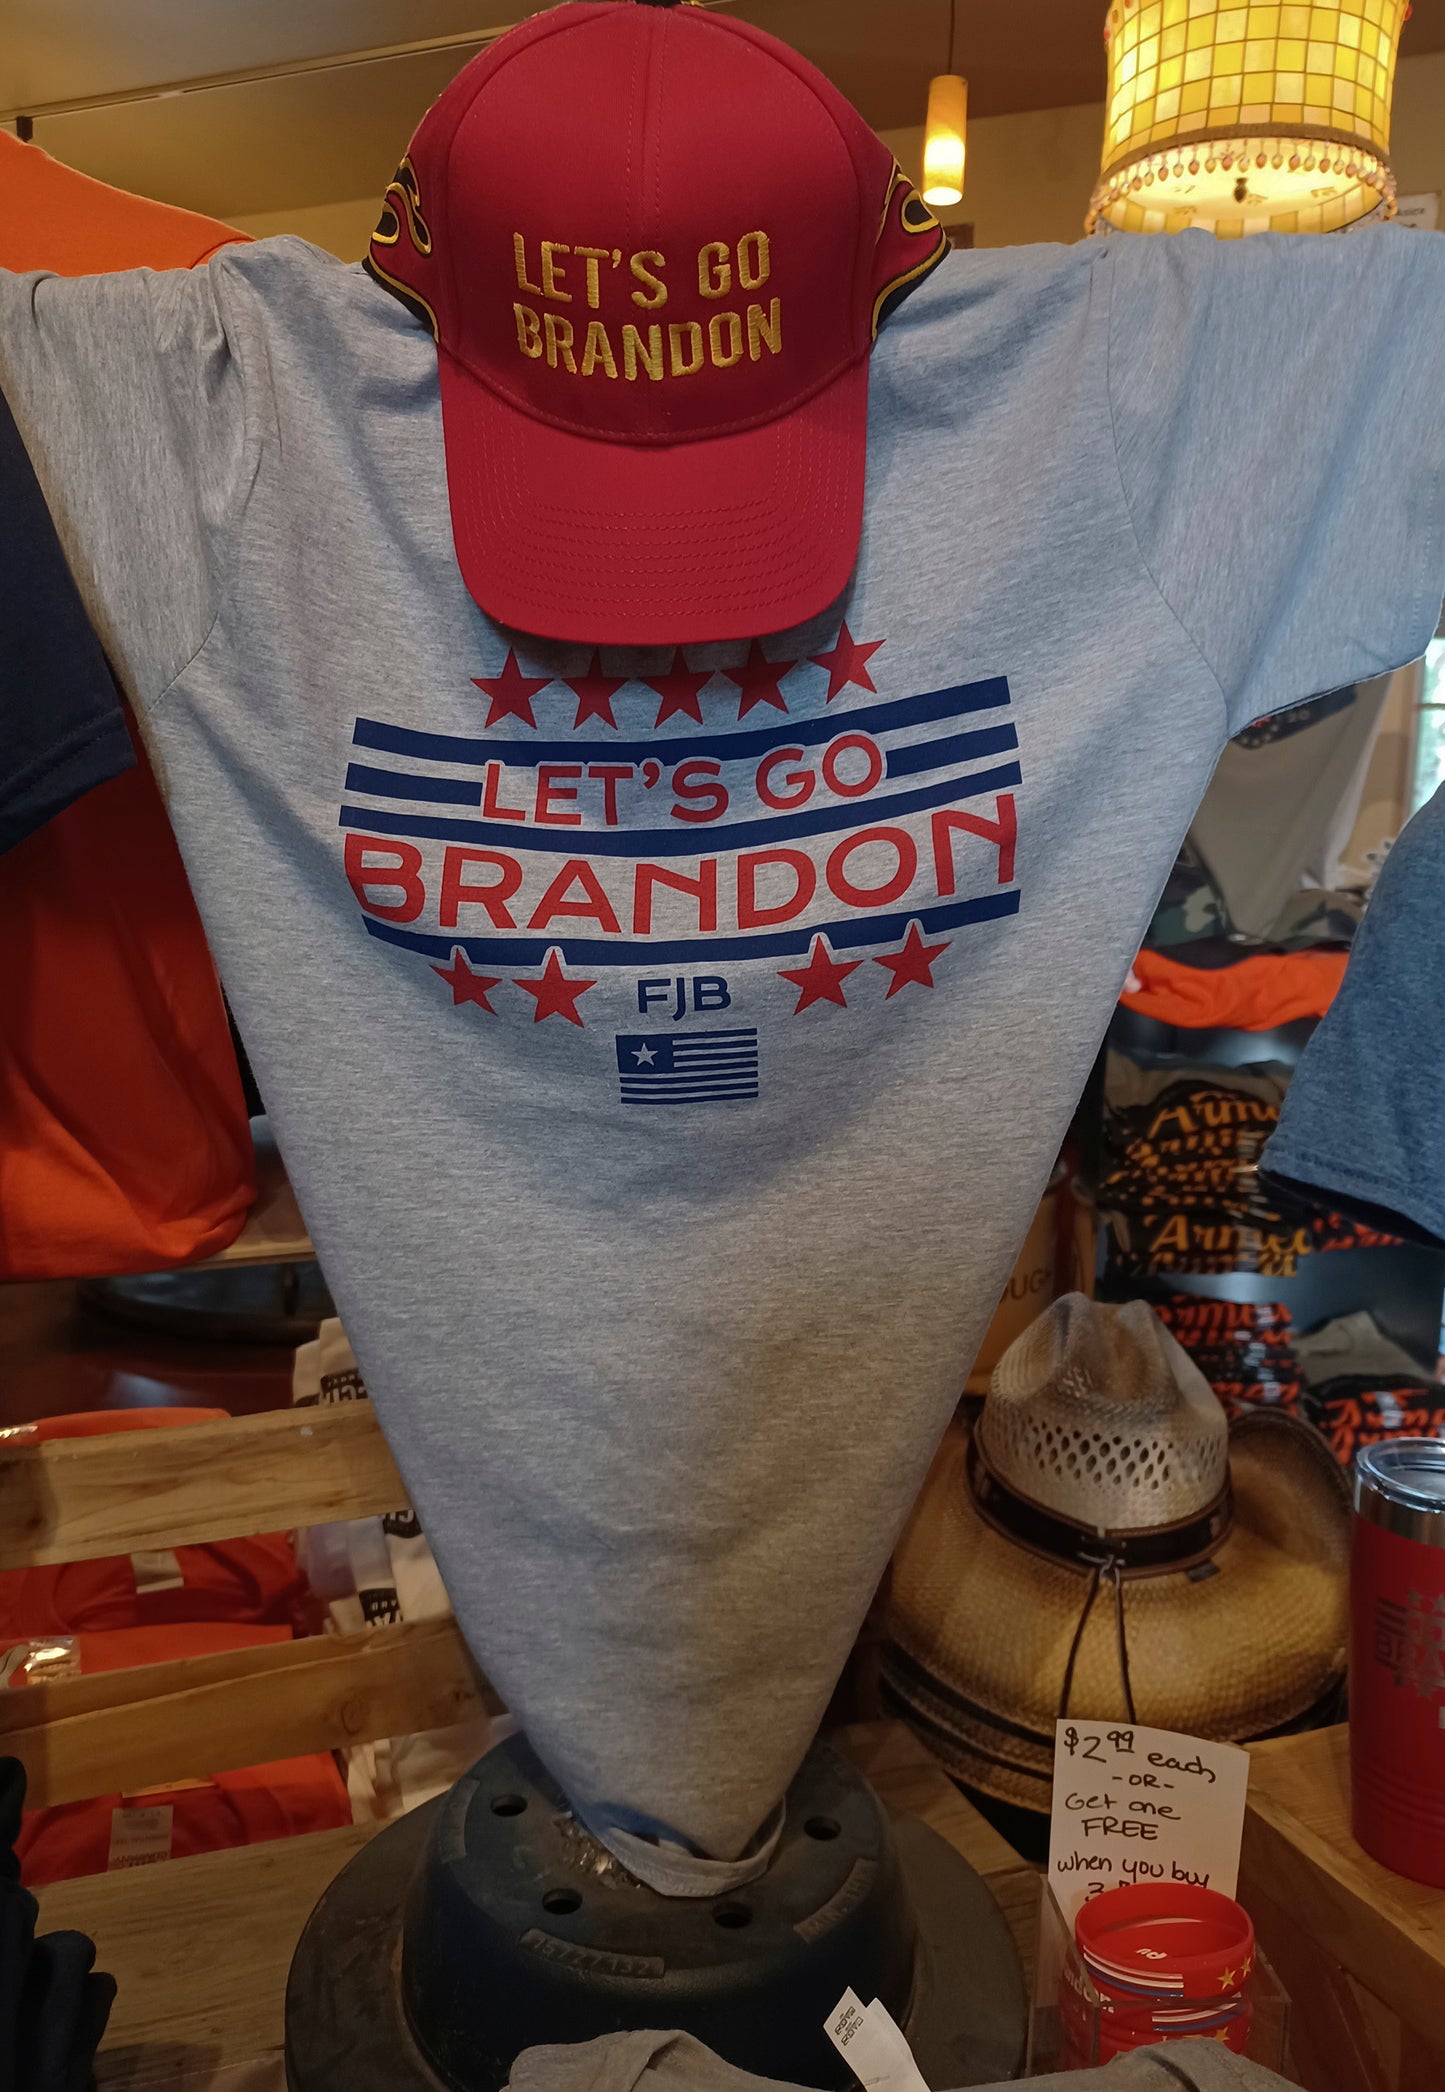 Let's Go Brandon t-shirt on display in store